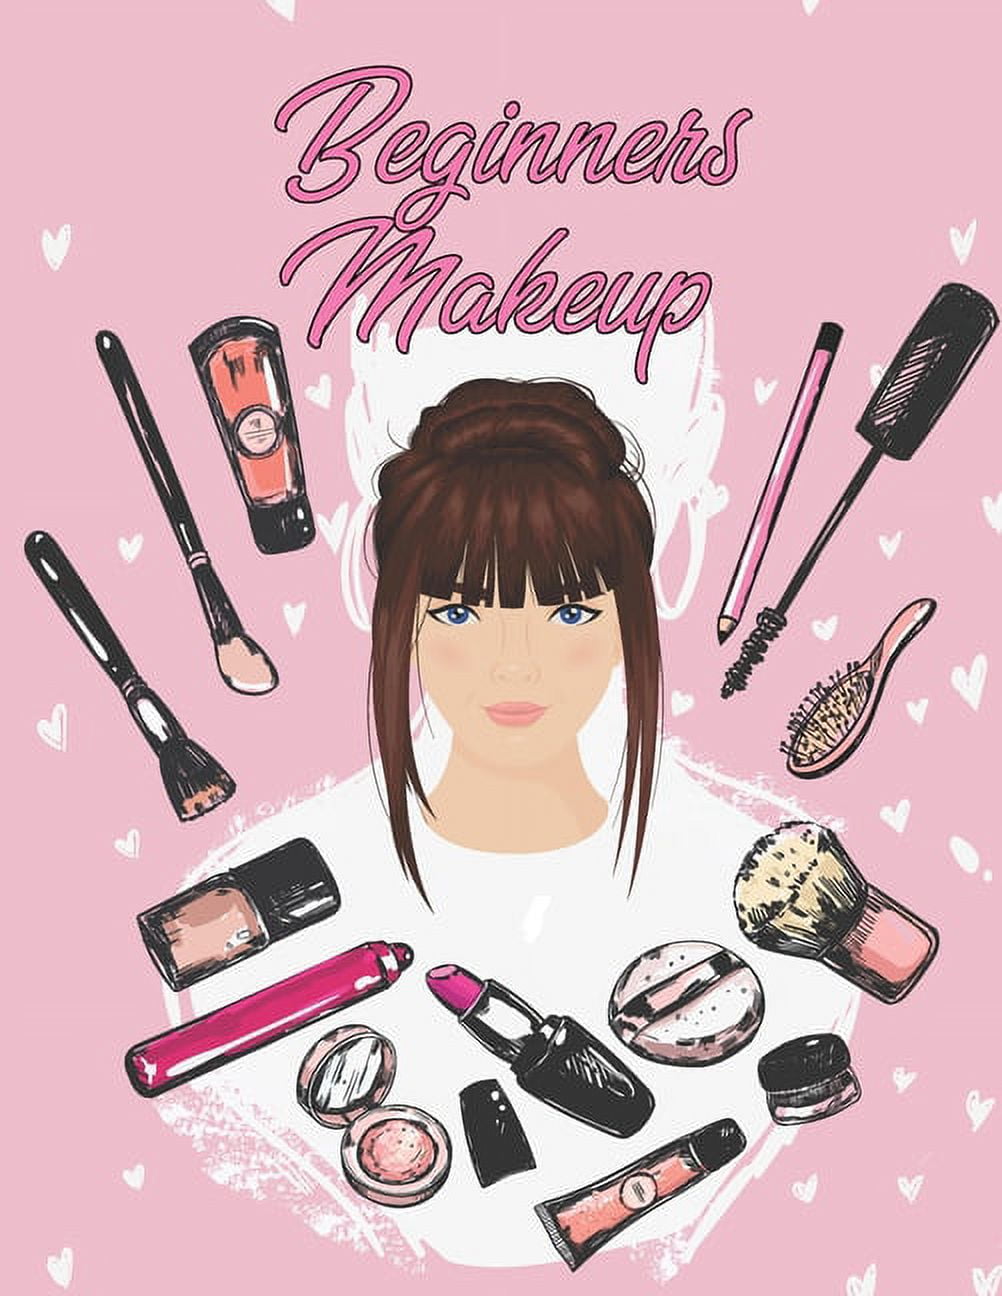 Beginners Makeup: Basic Hair and Face Charts to Practice Makeup and Coloring Pages for Kids and Young Aspiring Makeup Artists [Book]